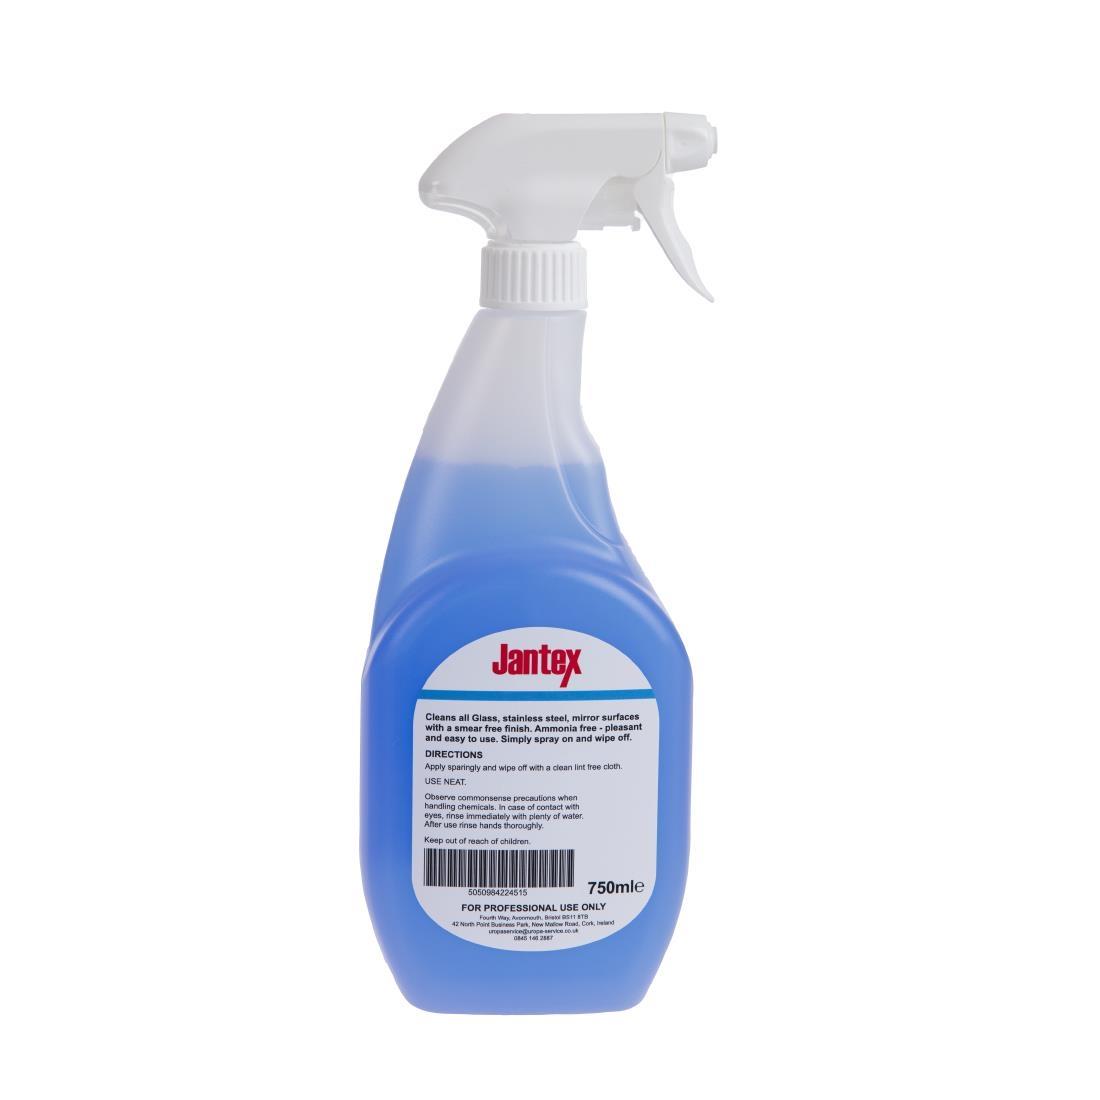 Jantex Glass and Stainless Steel Cleaner Ready To Use 750ml - CF980  - 3